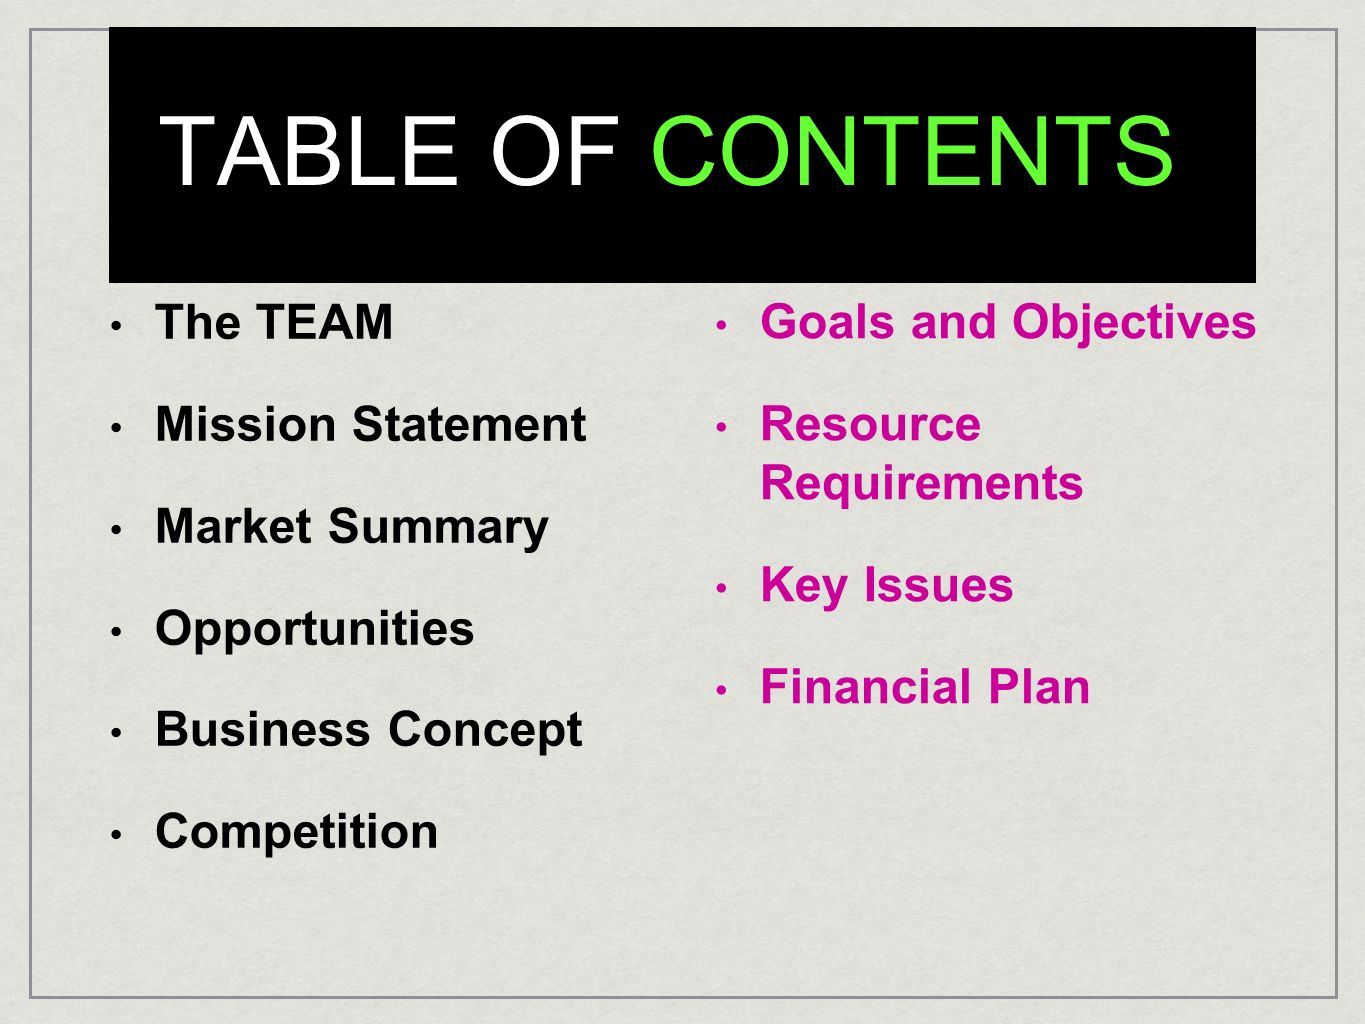 TABLE OF CONTENTS The TEAM Mission Statement Market Summary Opportunities Business Concept Competition Goals and Objectives Resource Requirements Key Issues Financial Plan